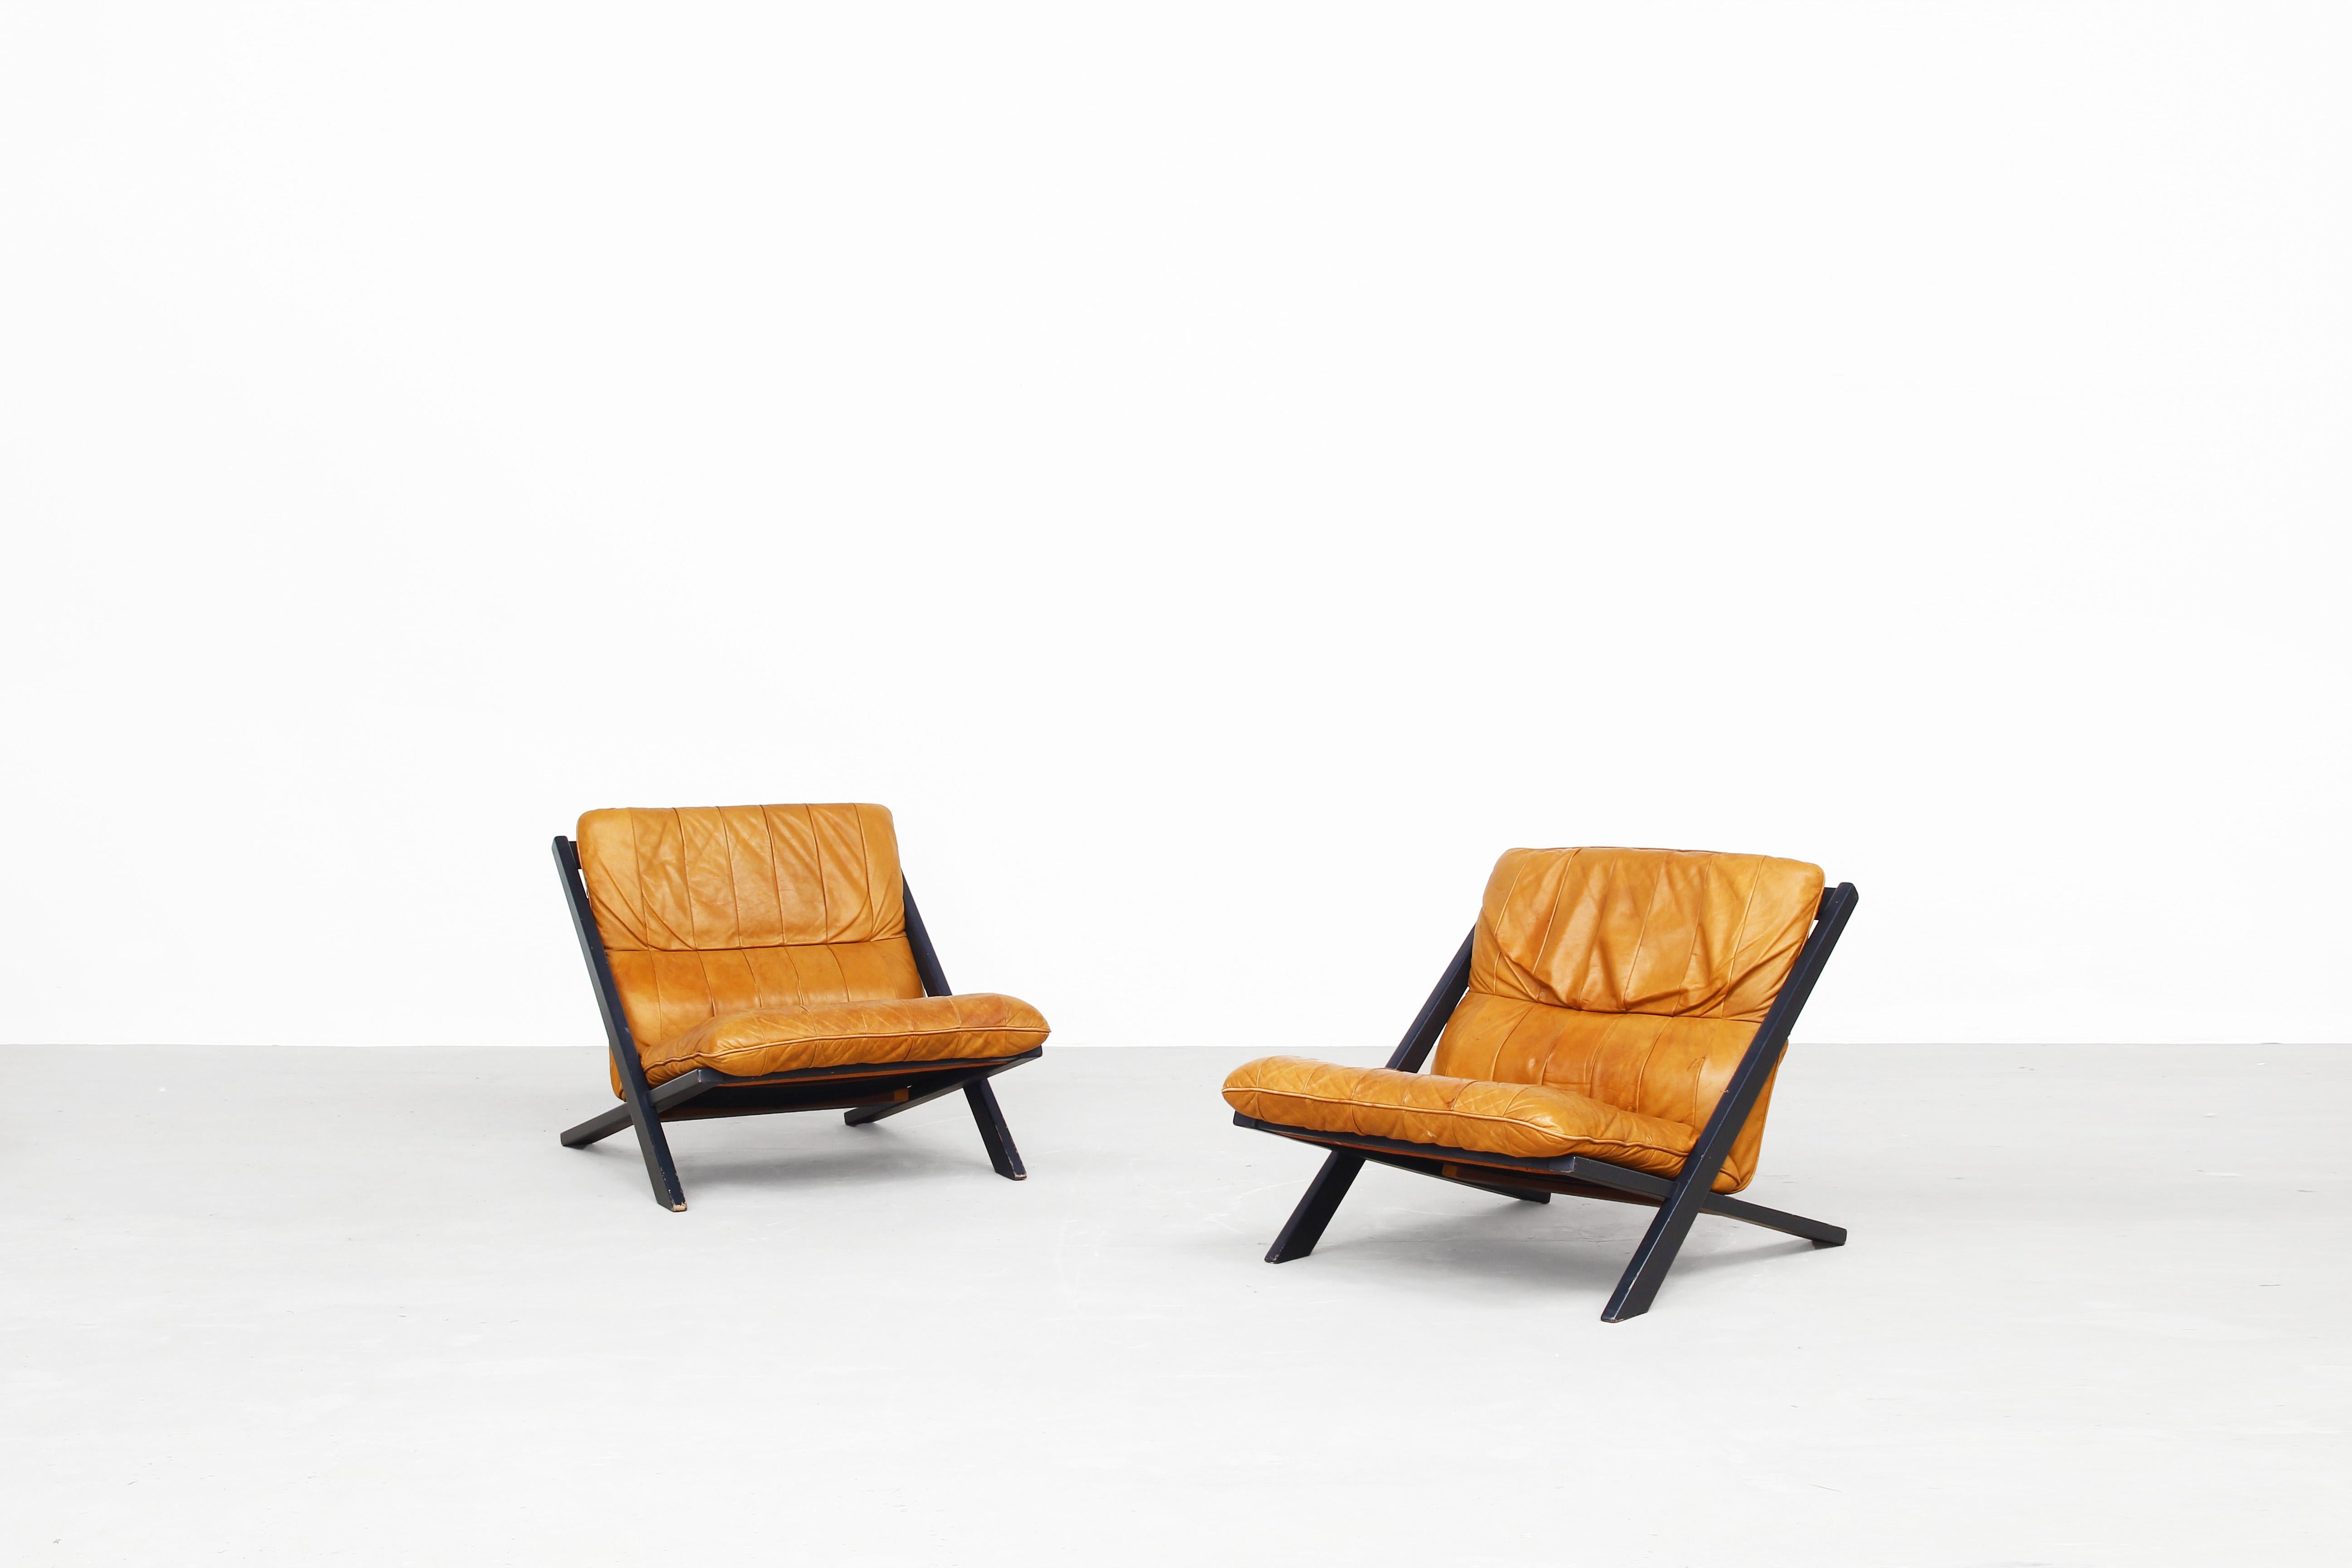 Very beautiful pair of lounge chairs designed by Ueli Berger for De Sede, 1970s, Switzerland.
Both chairs come in a great original condition with a great patinated leather in brown-cognac. Without any damages, repairs - ready for use. Two matching